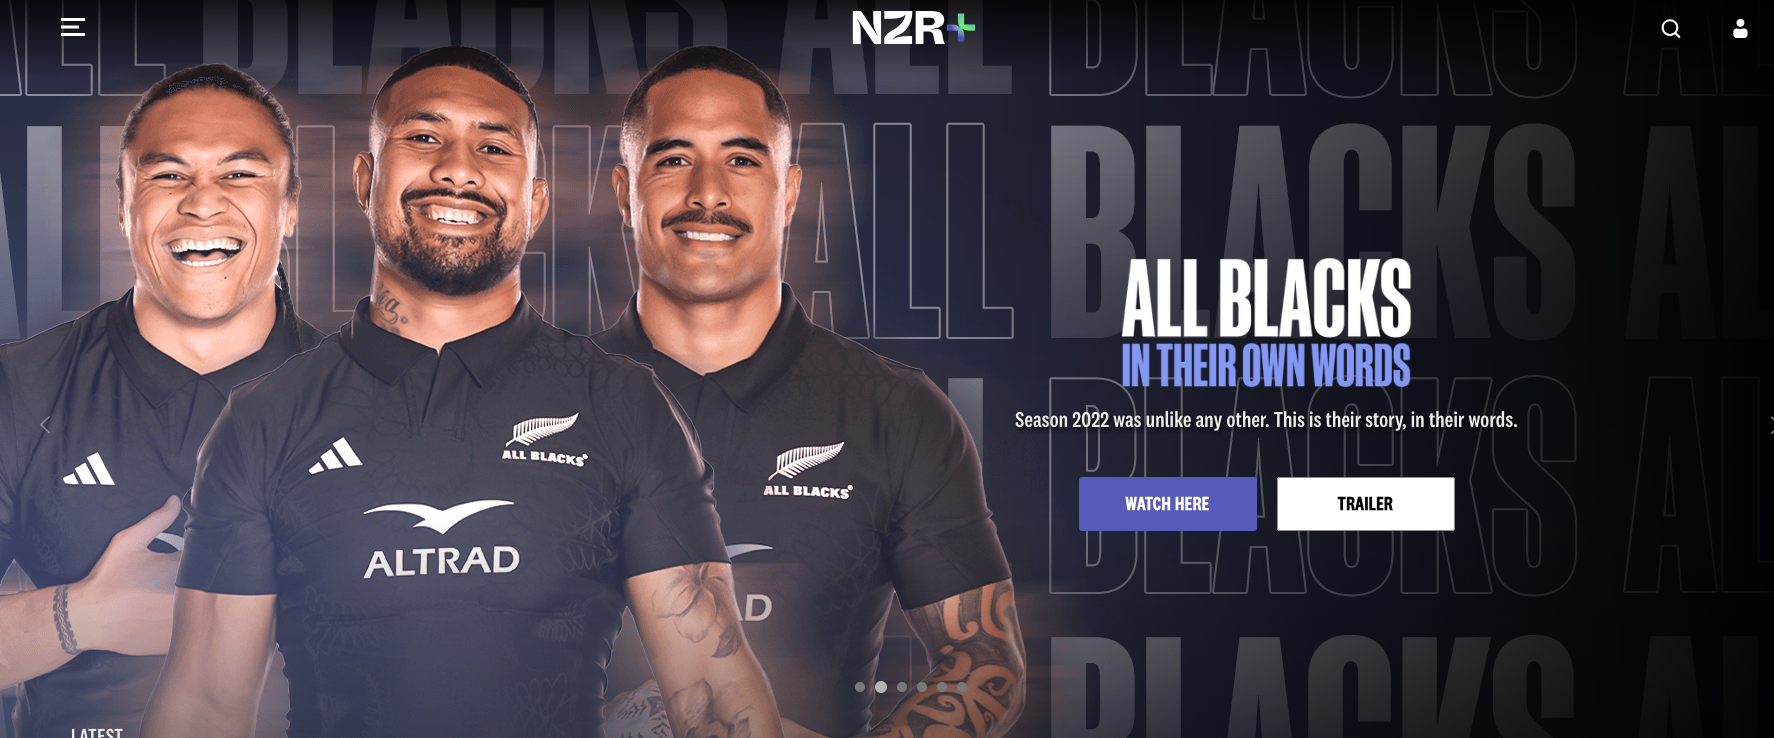 New Zealand Rugby Partners With Endeavor Streaming to Launch Global Direct-to-Consumer Service, NZR+